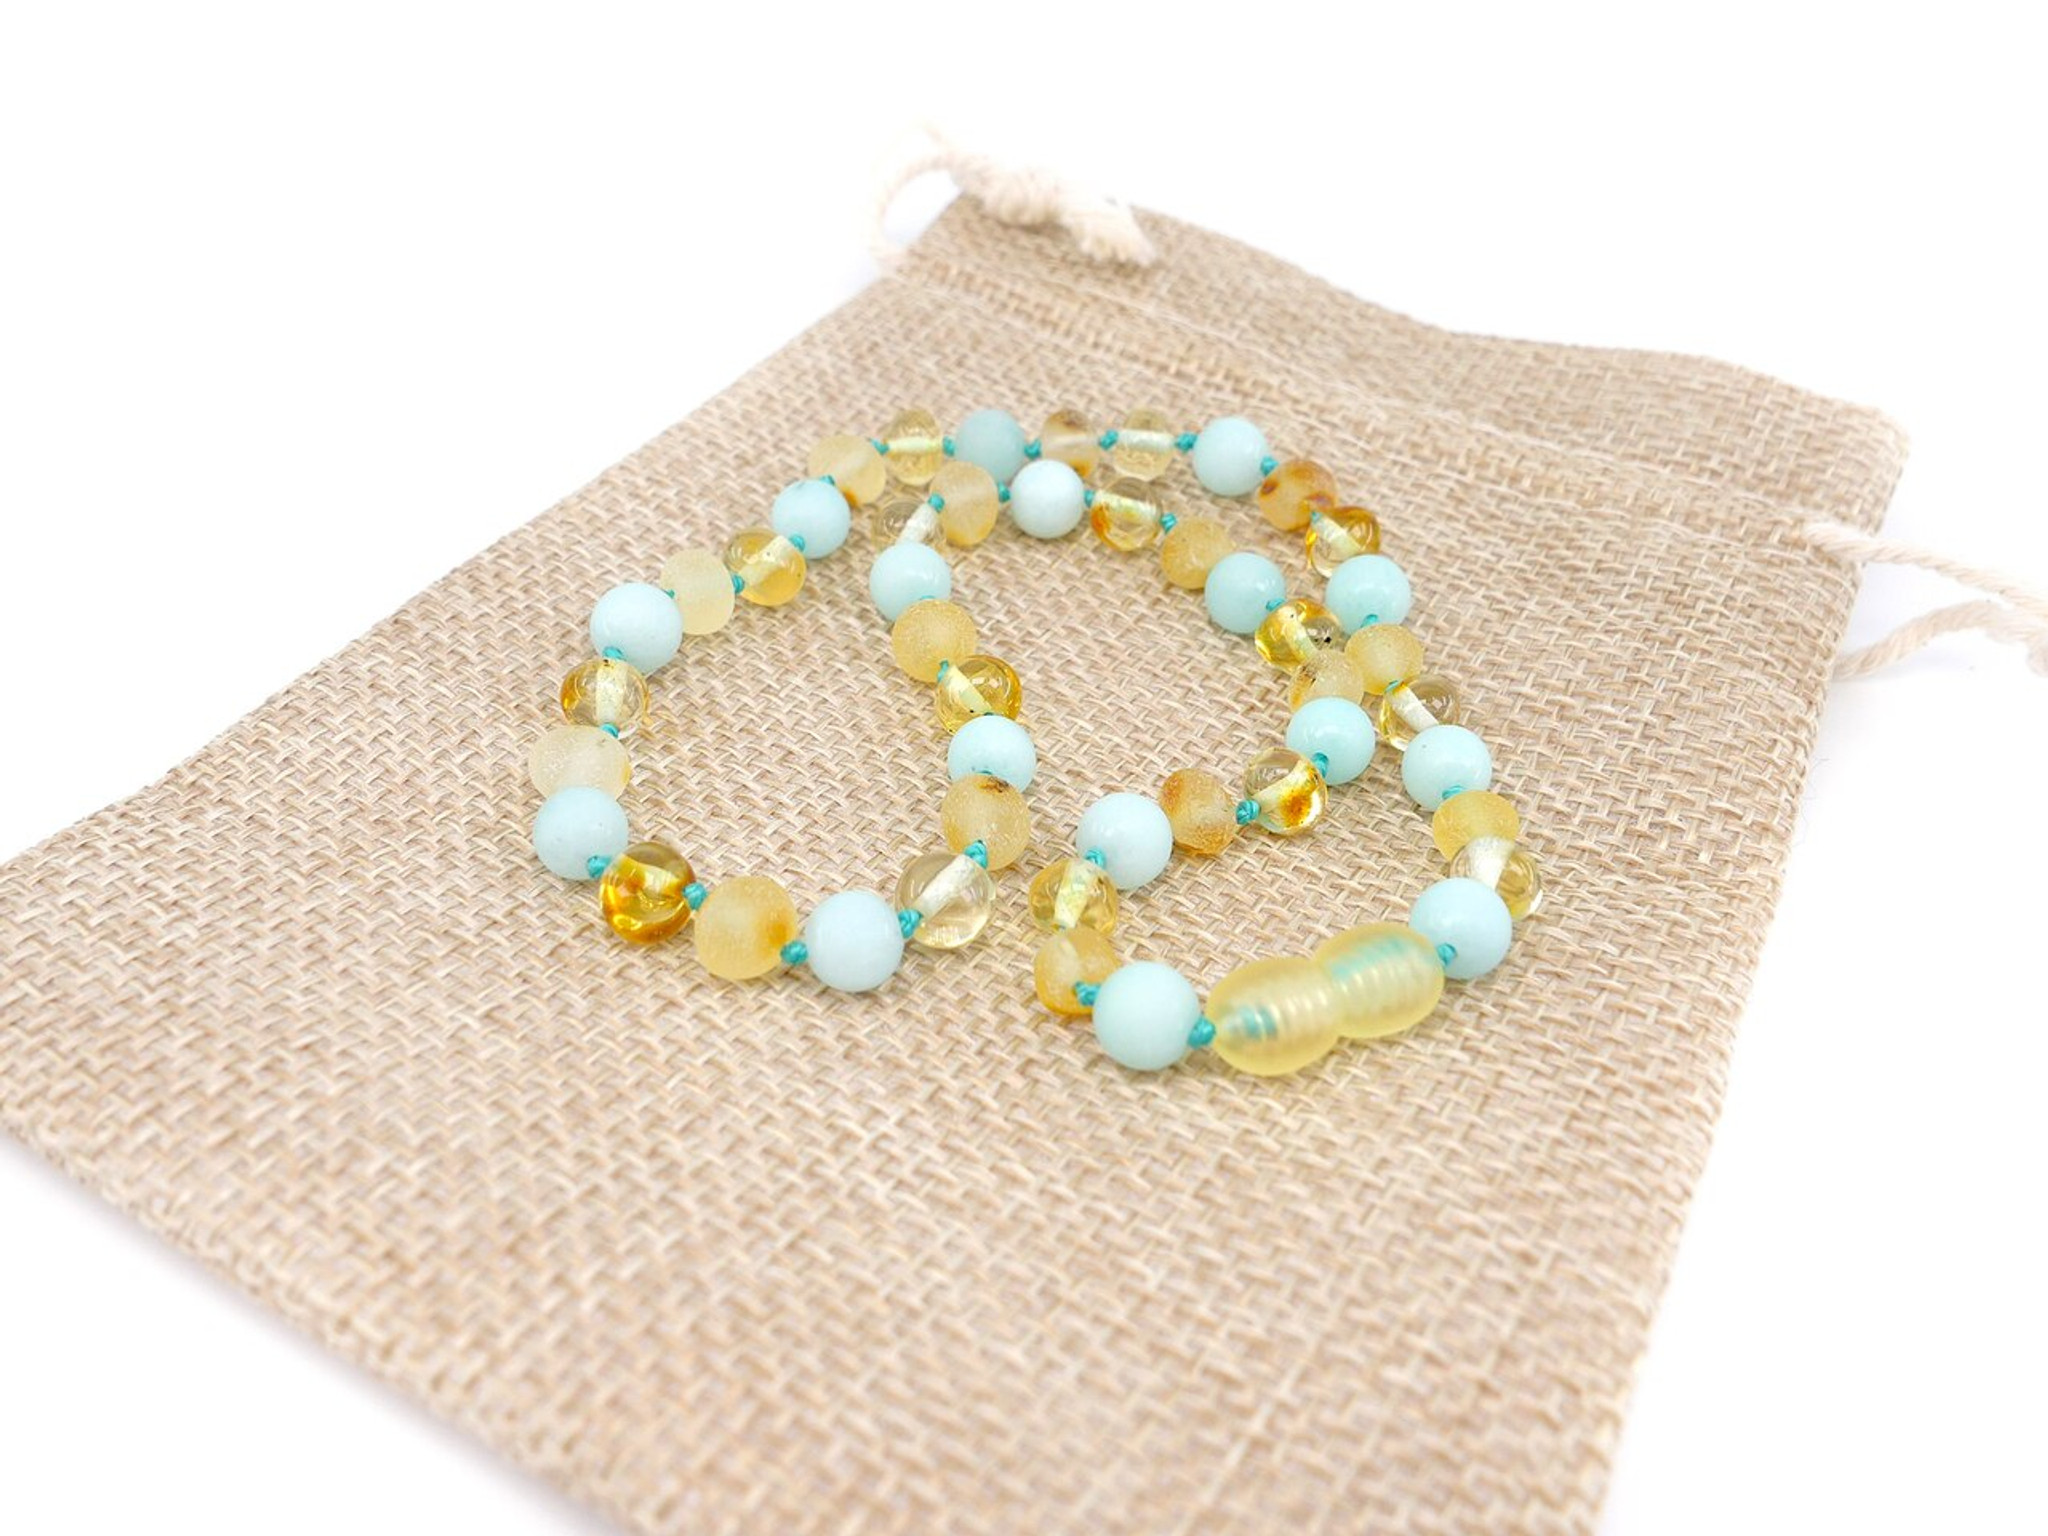 Multicolour Baltic Amber Baby Set - Matching Teething Necklace & Bracelet/Anklet  - Amber People